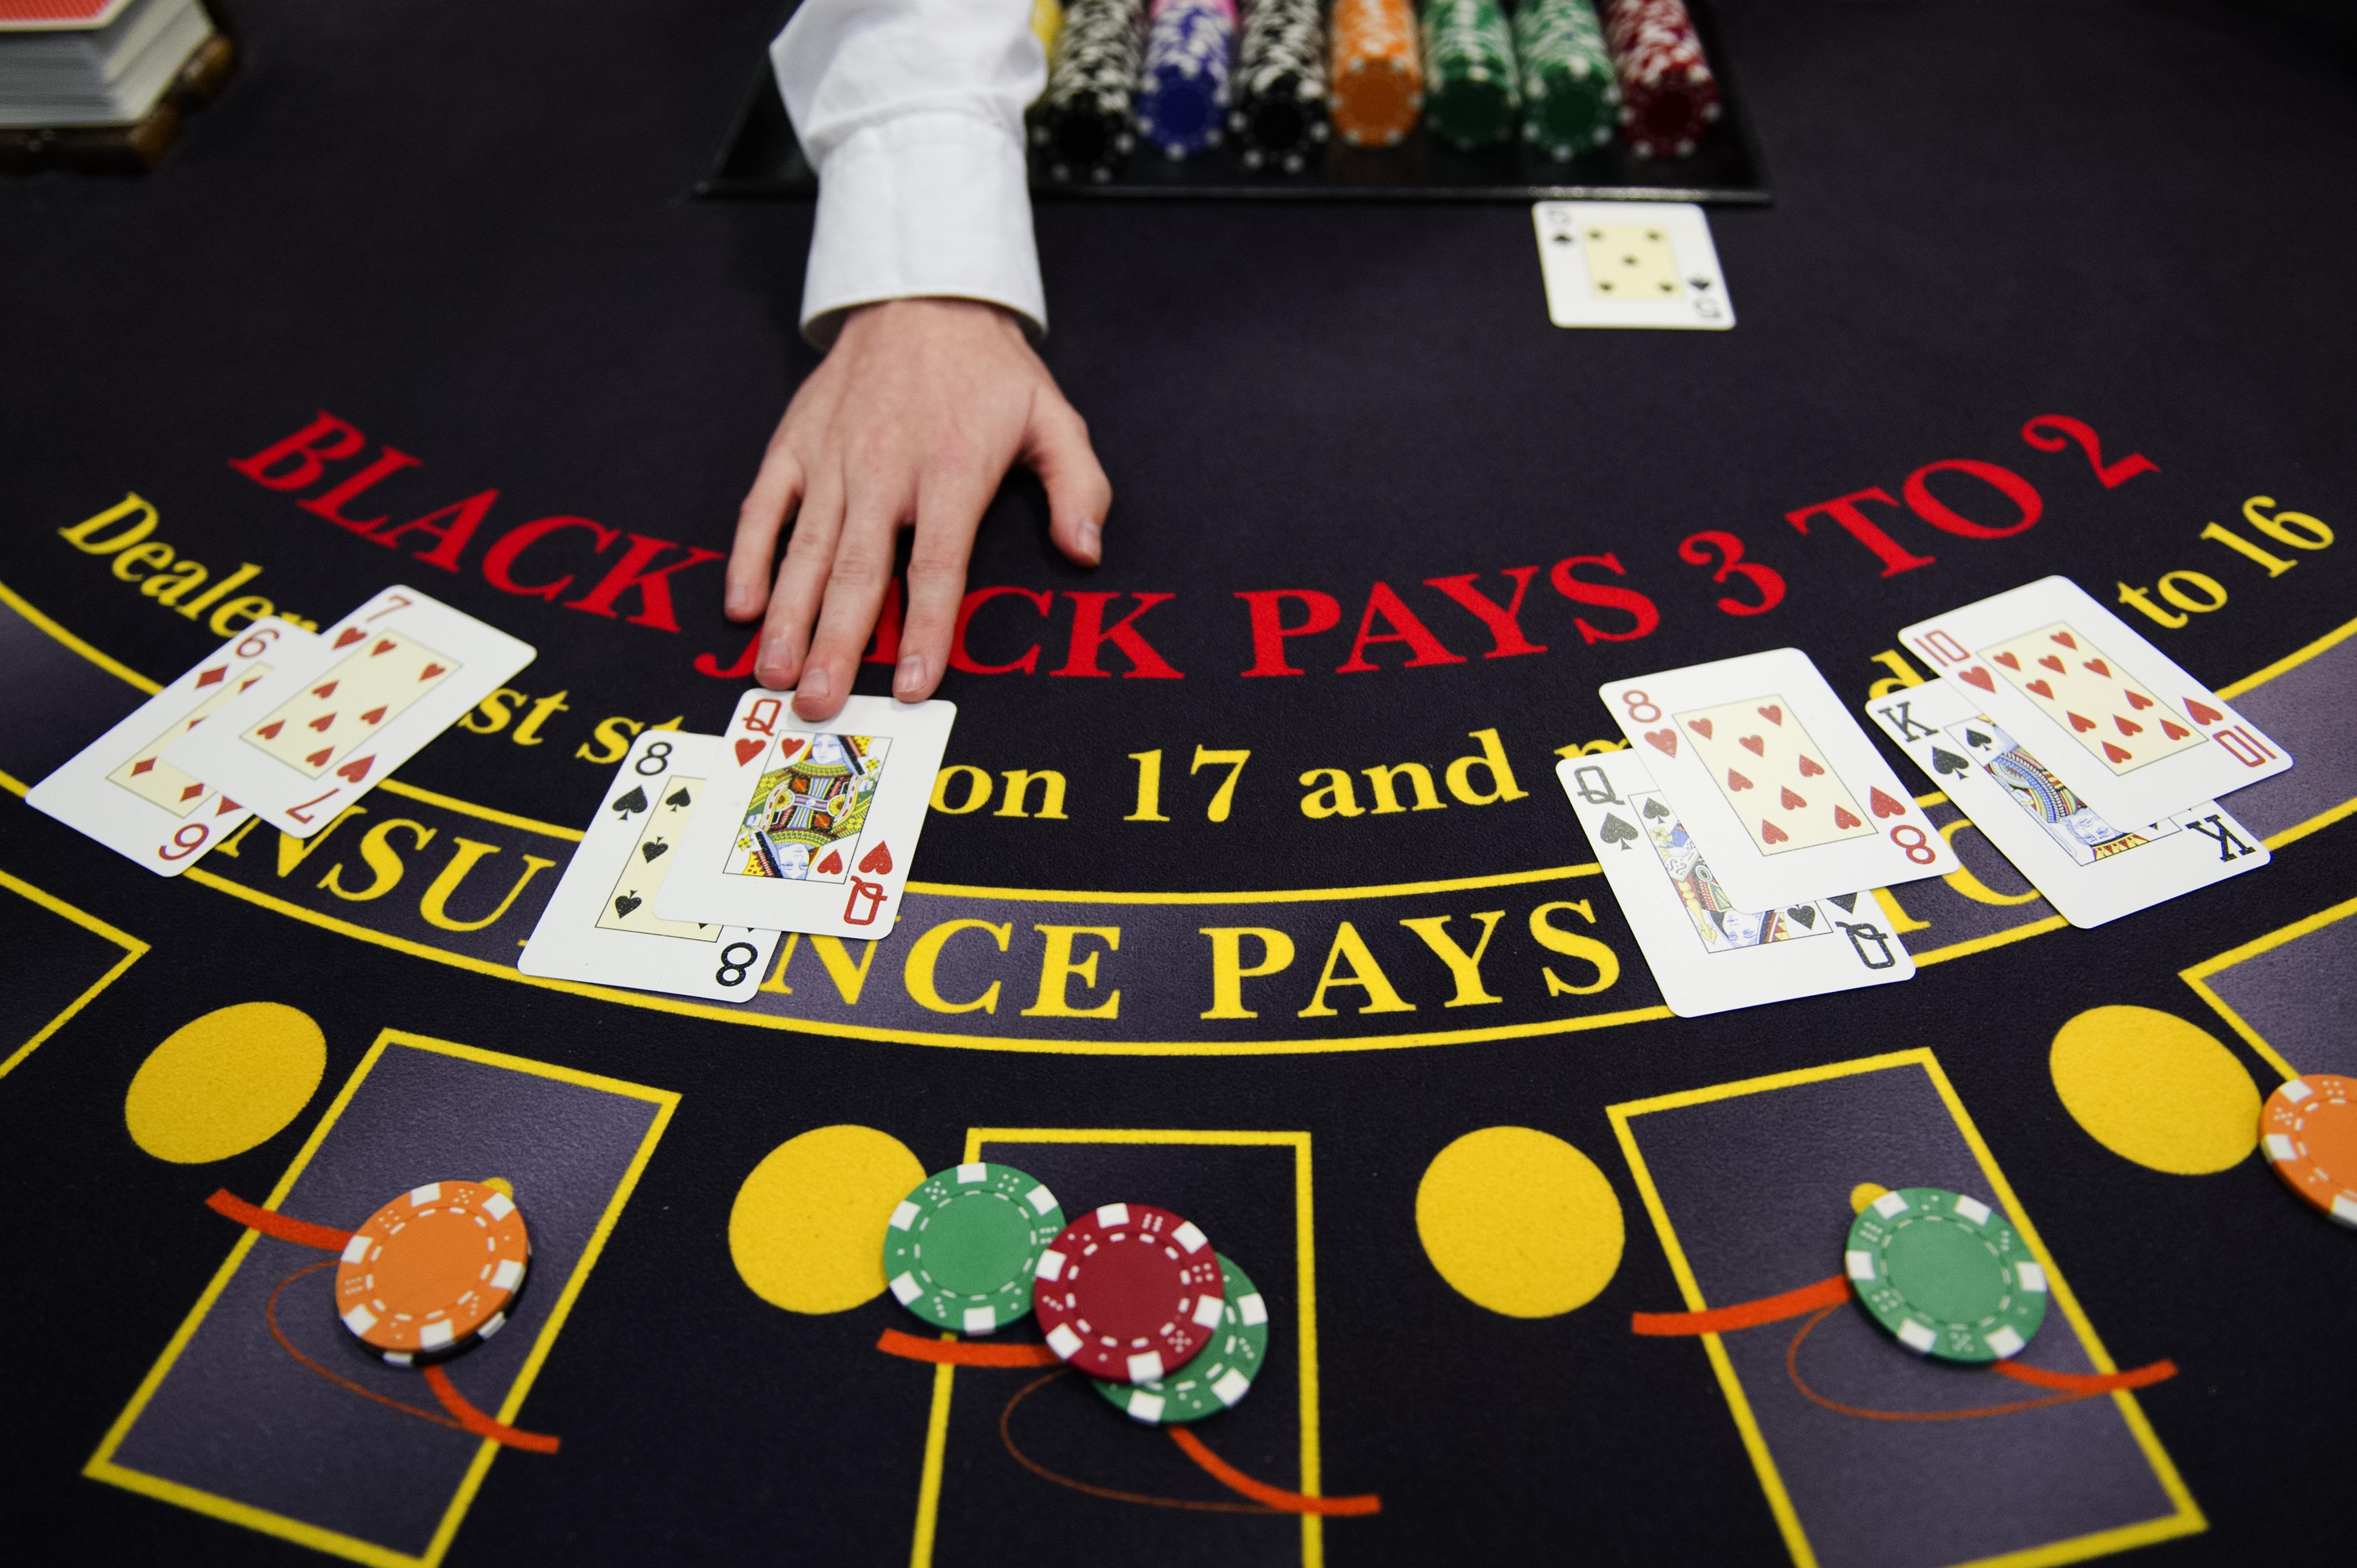 Dealing craps and blackjack: What's it like to work as a casino dealer?